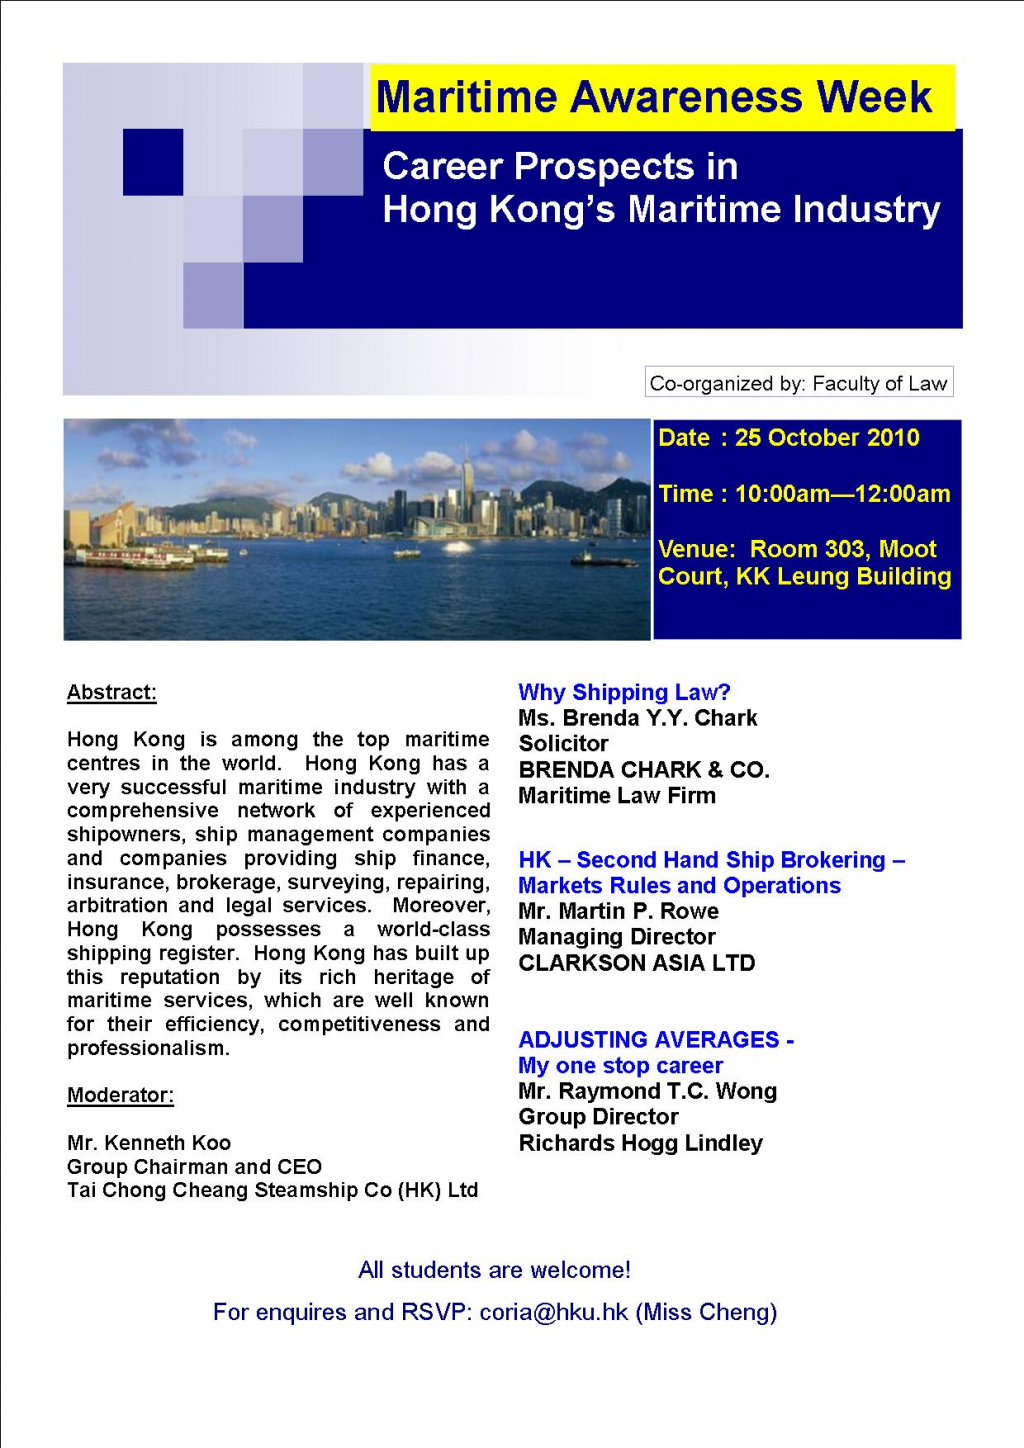 Career Prospects in Hong Kong’s Maritime Industry